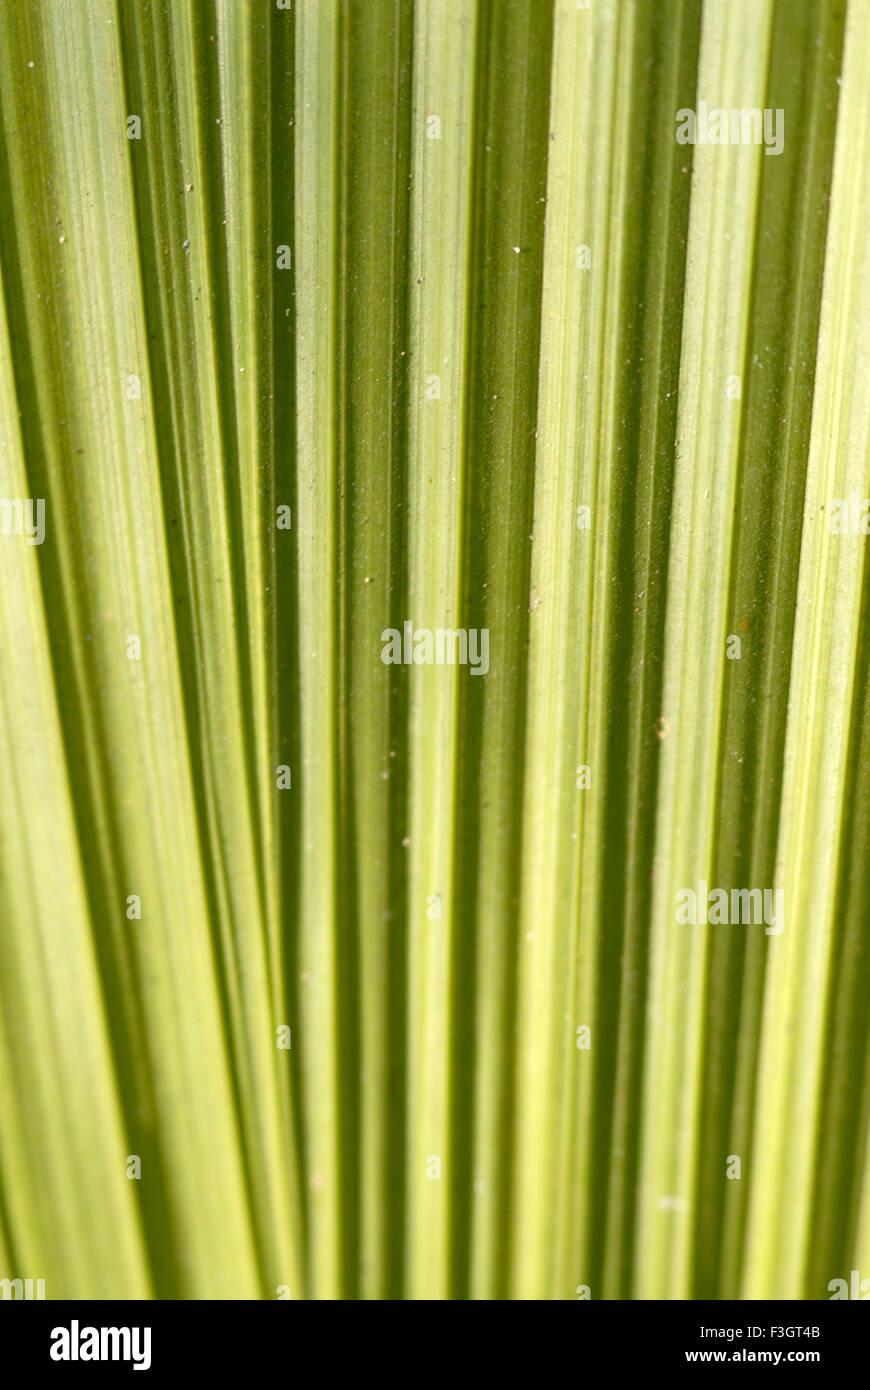 Green leave vertical lines Stock Photo